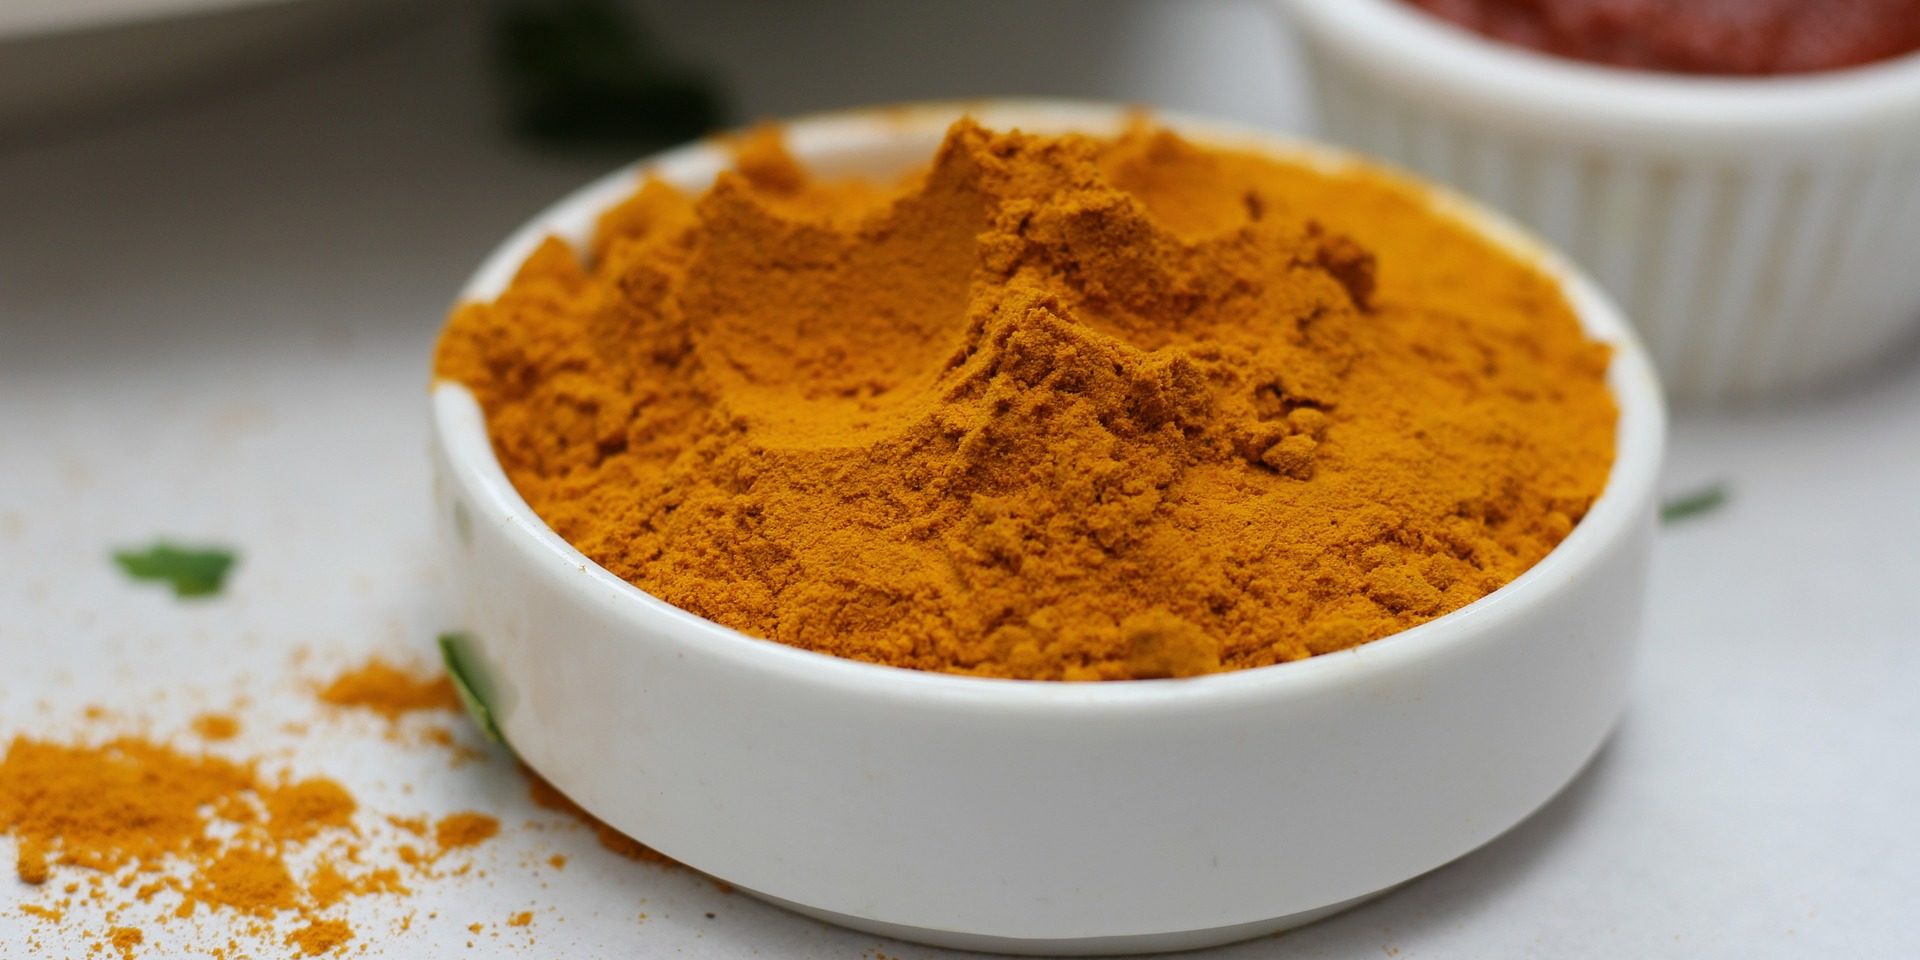 Is Turmeric Safe For Cats?